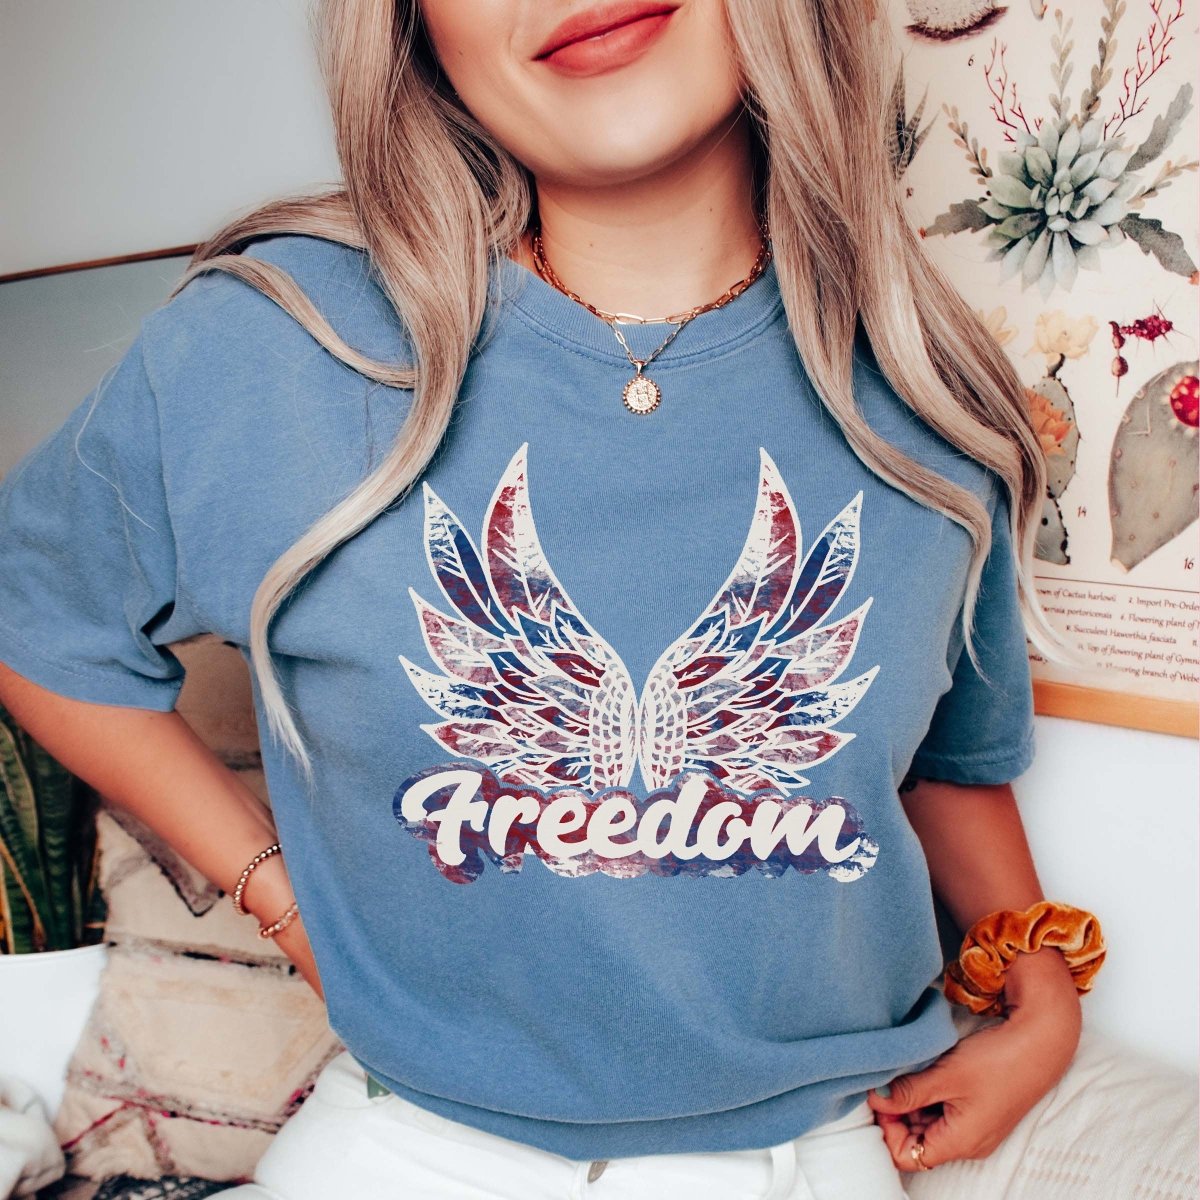 Freedom Set us Free Comfort Colors Tee - Limeberry Designs T-Shirt